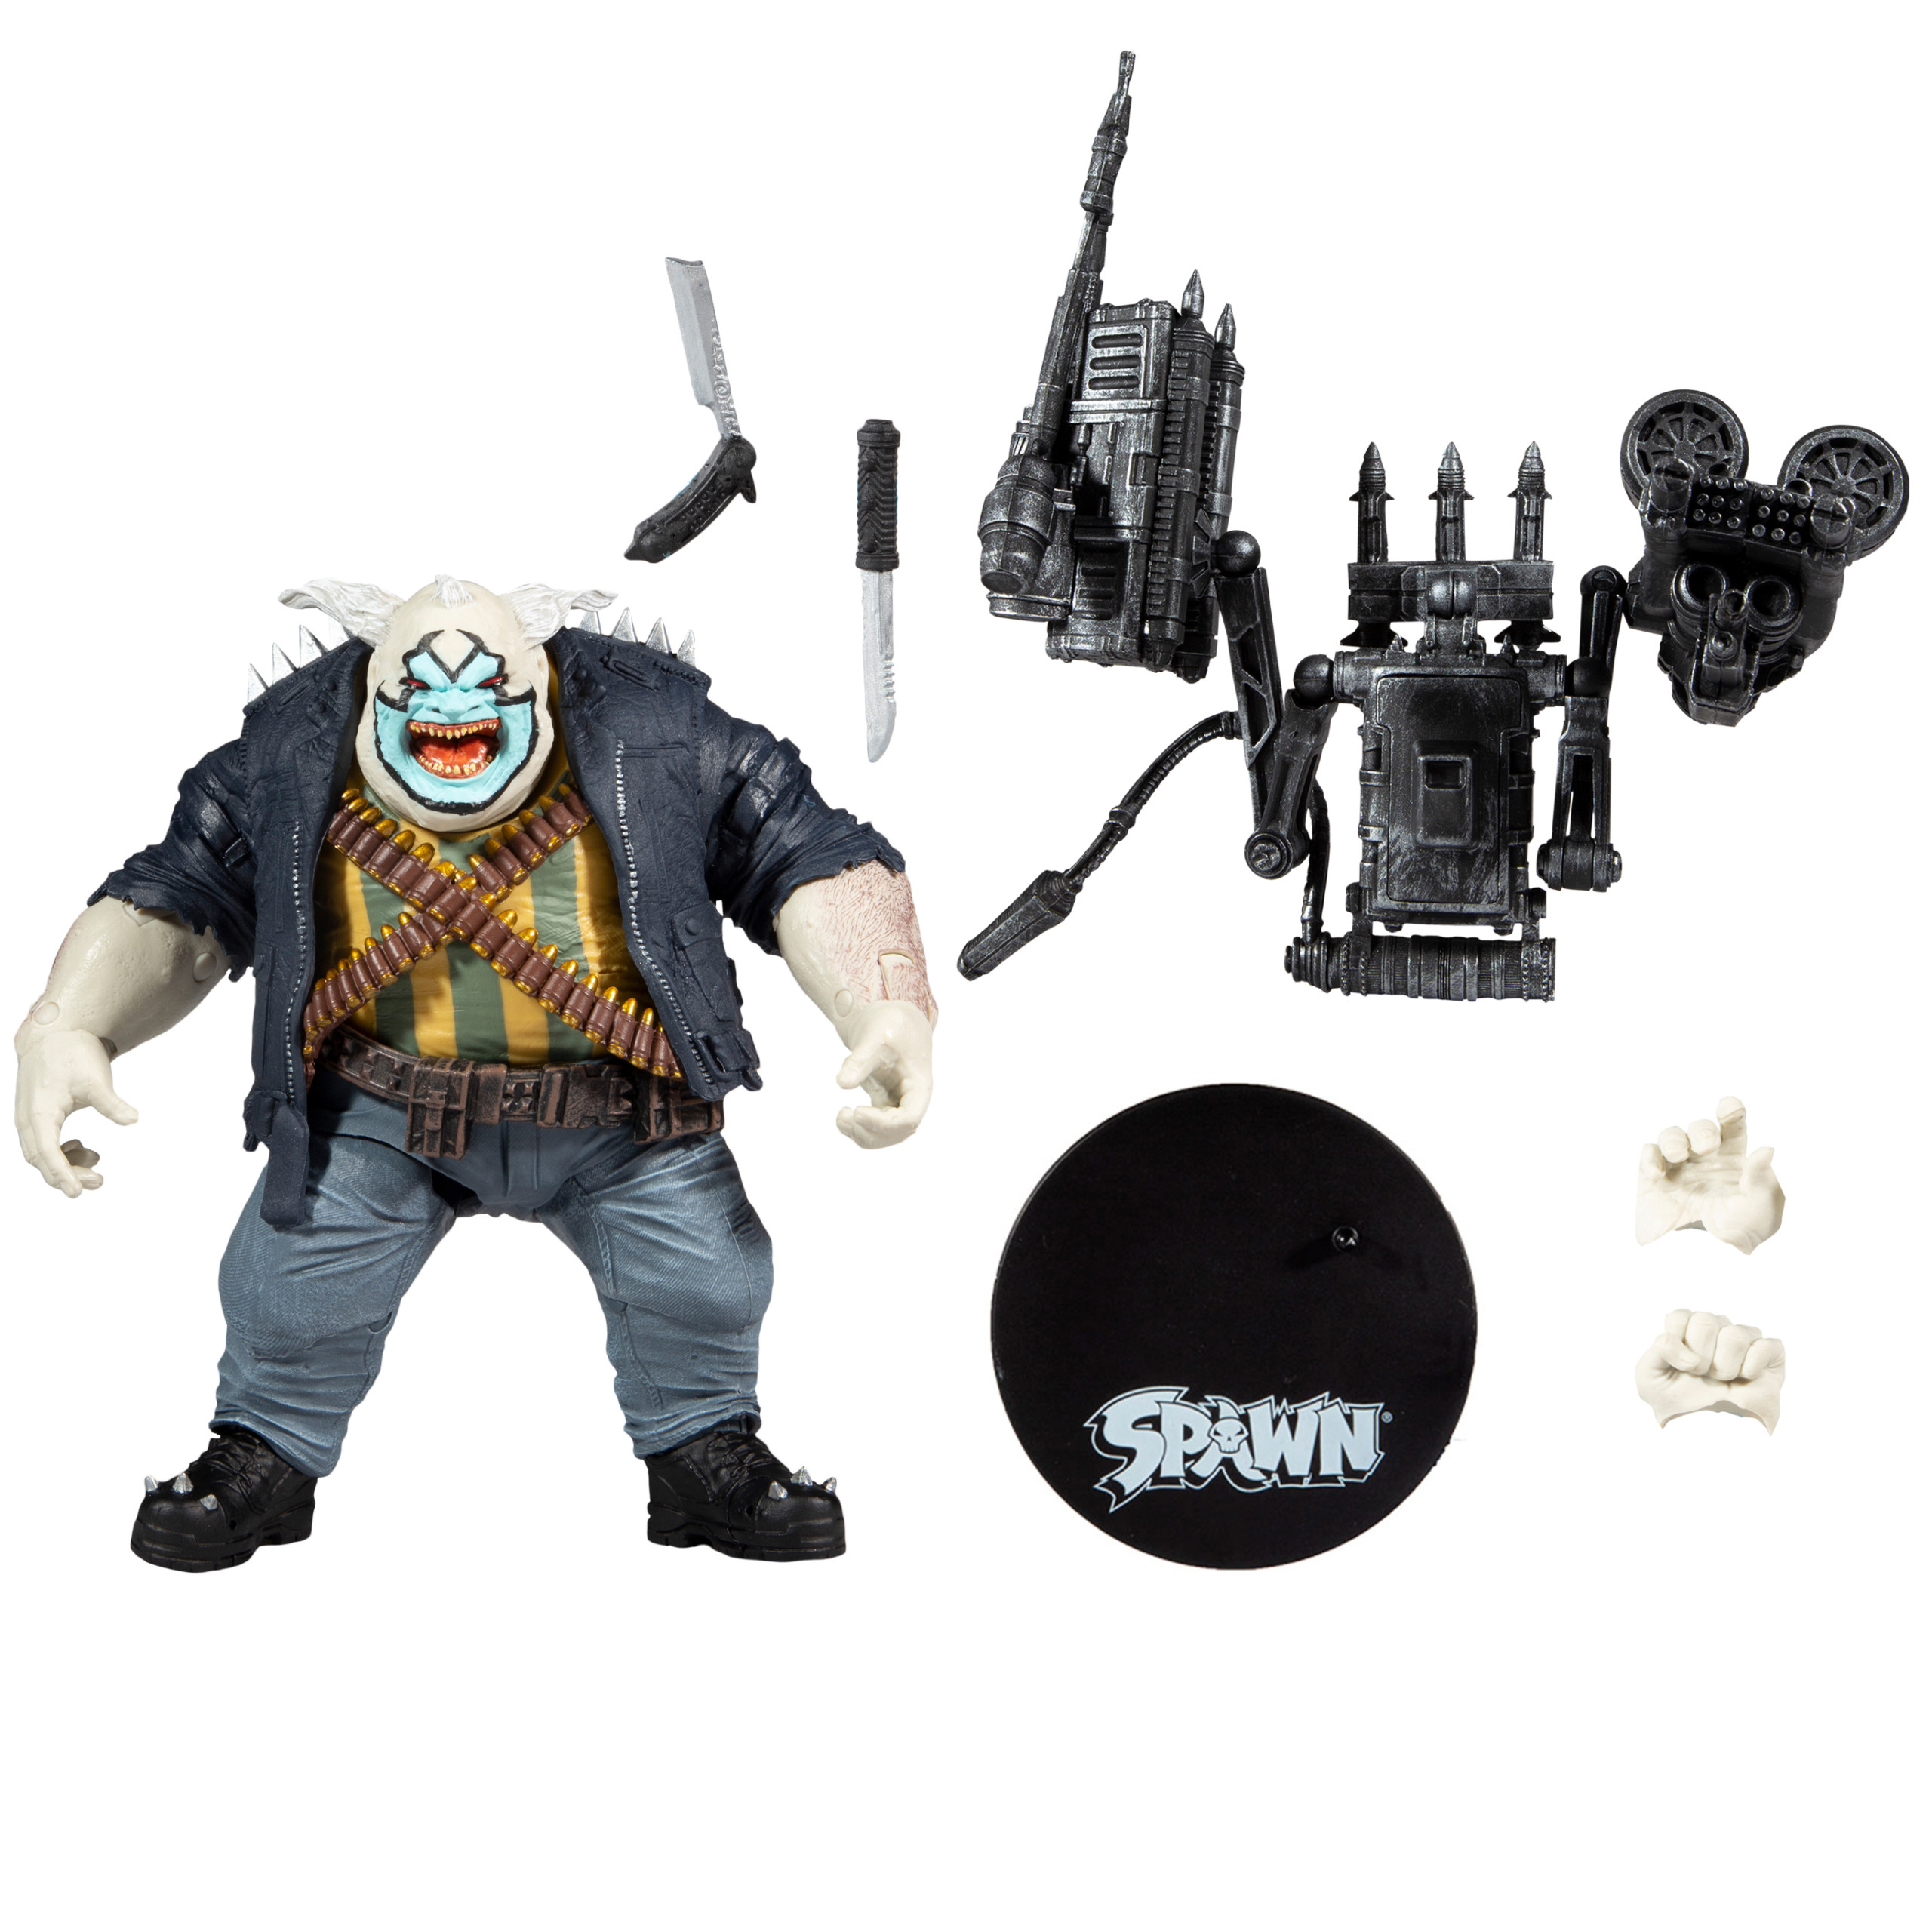 Spawn Deluxe Set - The Clown Action Figure | Spawn | 90161 